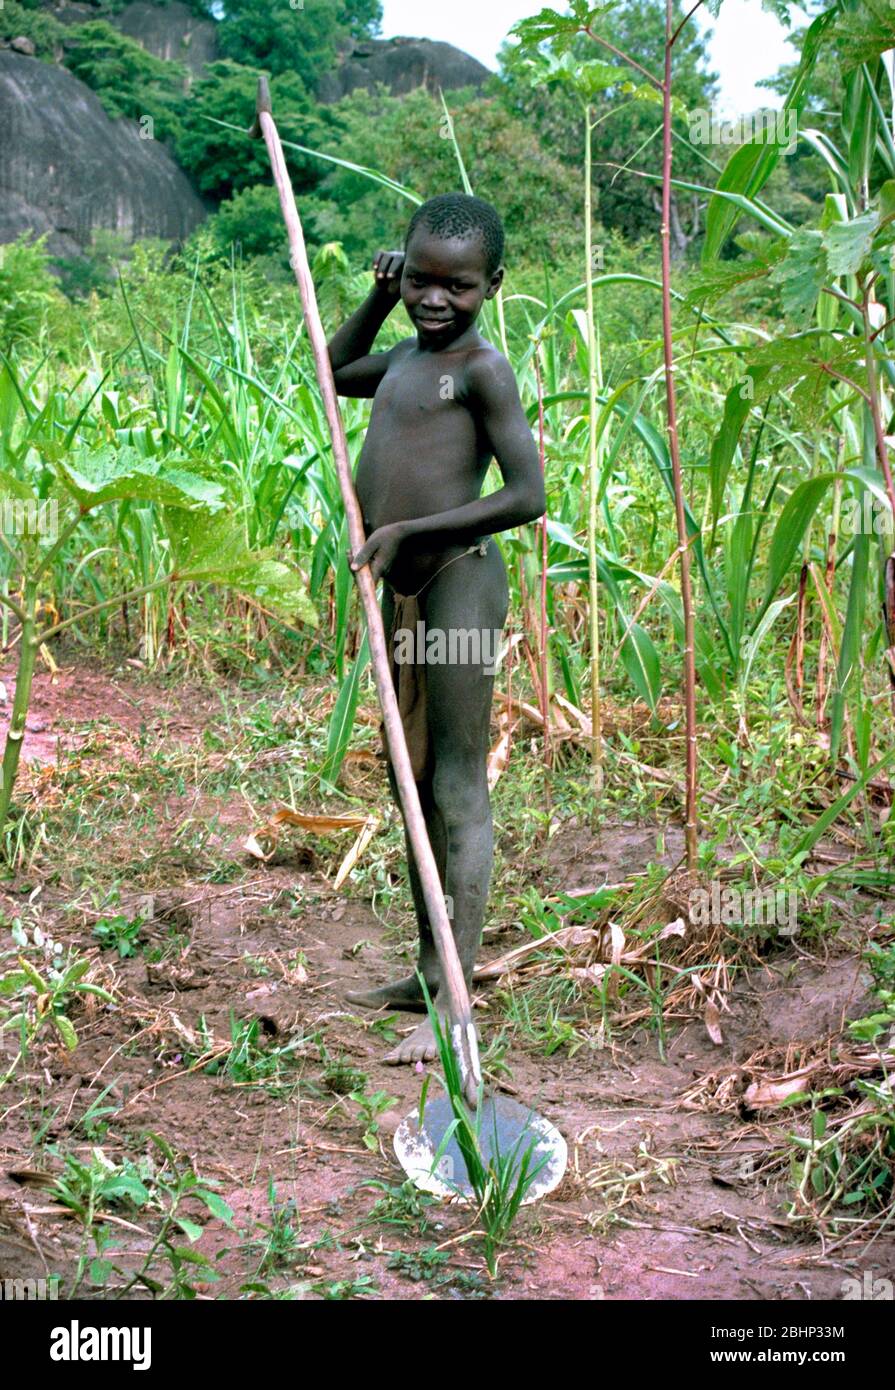 Sudanese boy using a hoe to farm the land in a remote village in Southern Sudan Stock Photo